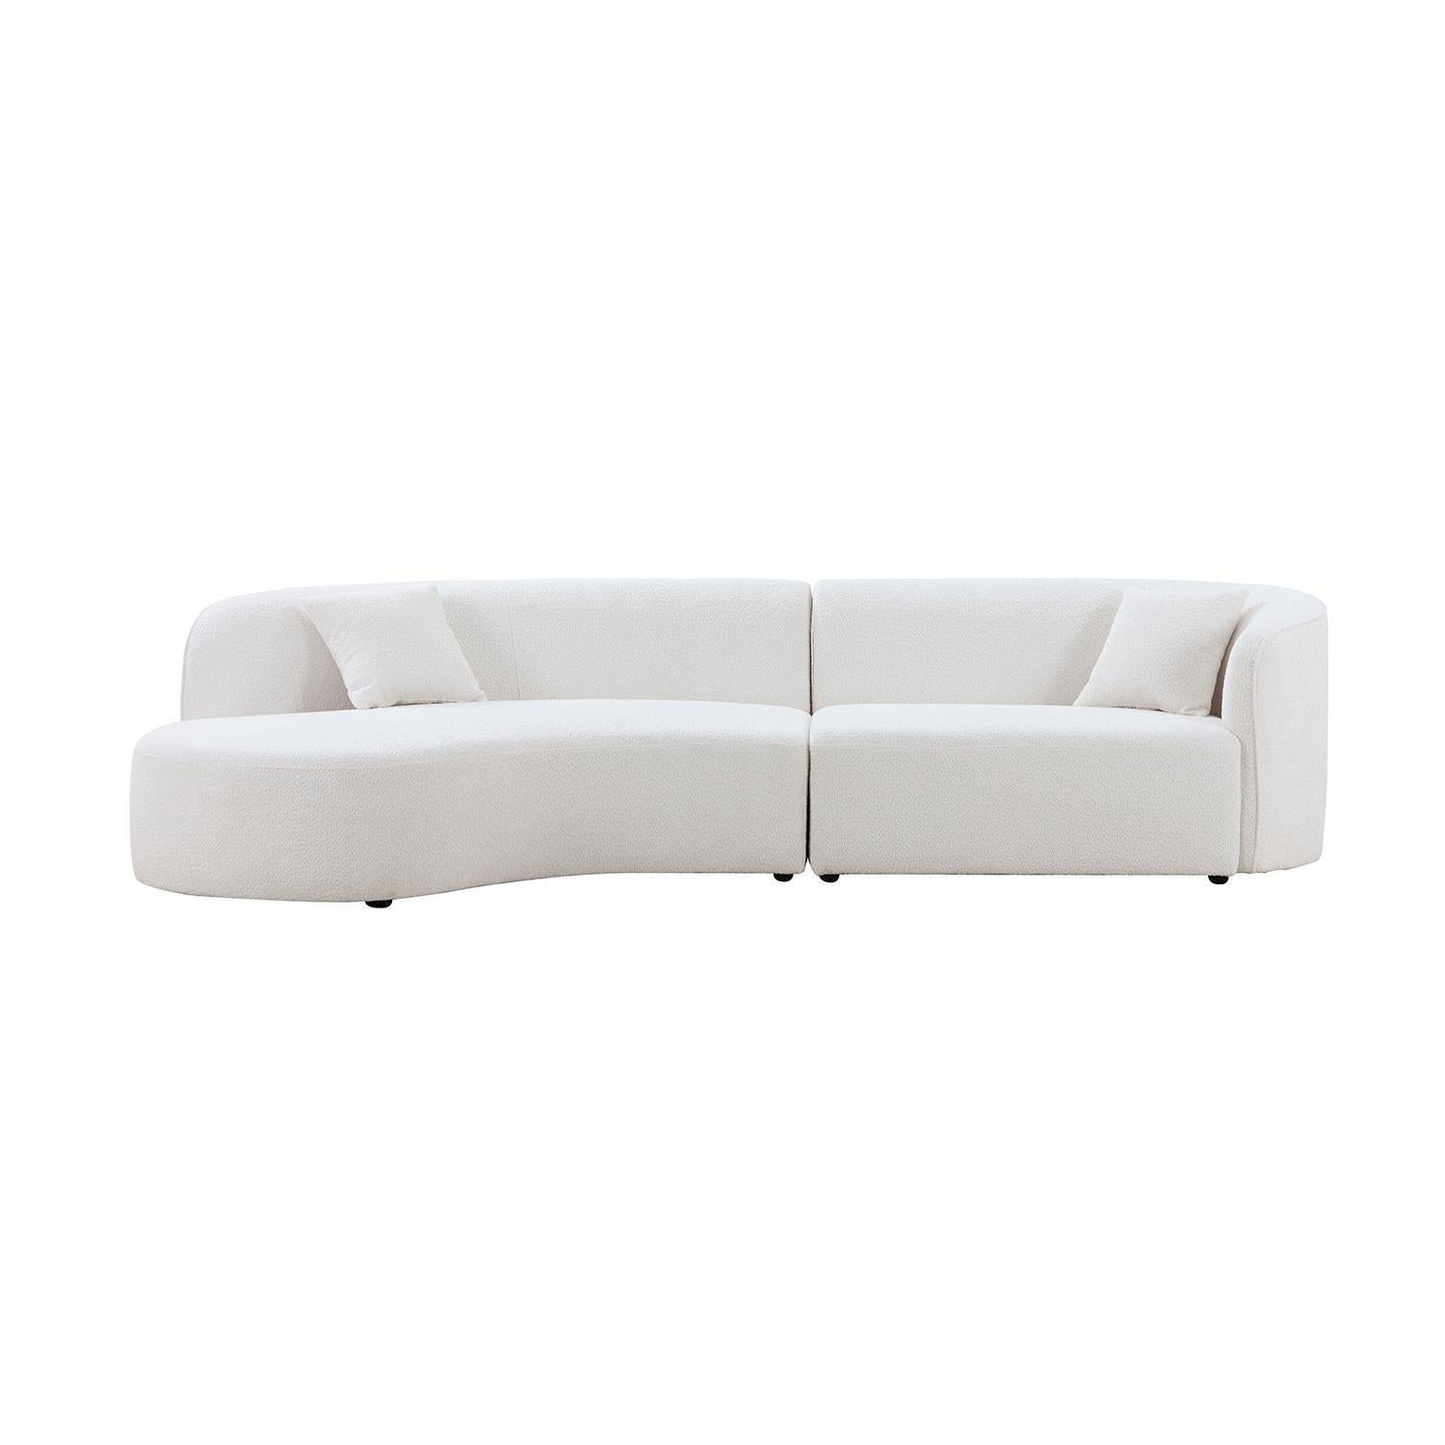 Luxury Modern Style Living Room Upholstery Curved Sofa with Chaise 2-Piece Set, Left Hand Facing Sectional,  Boucle Couch, White, Goodies N Stuff